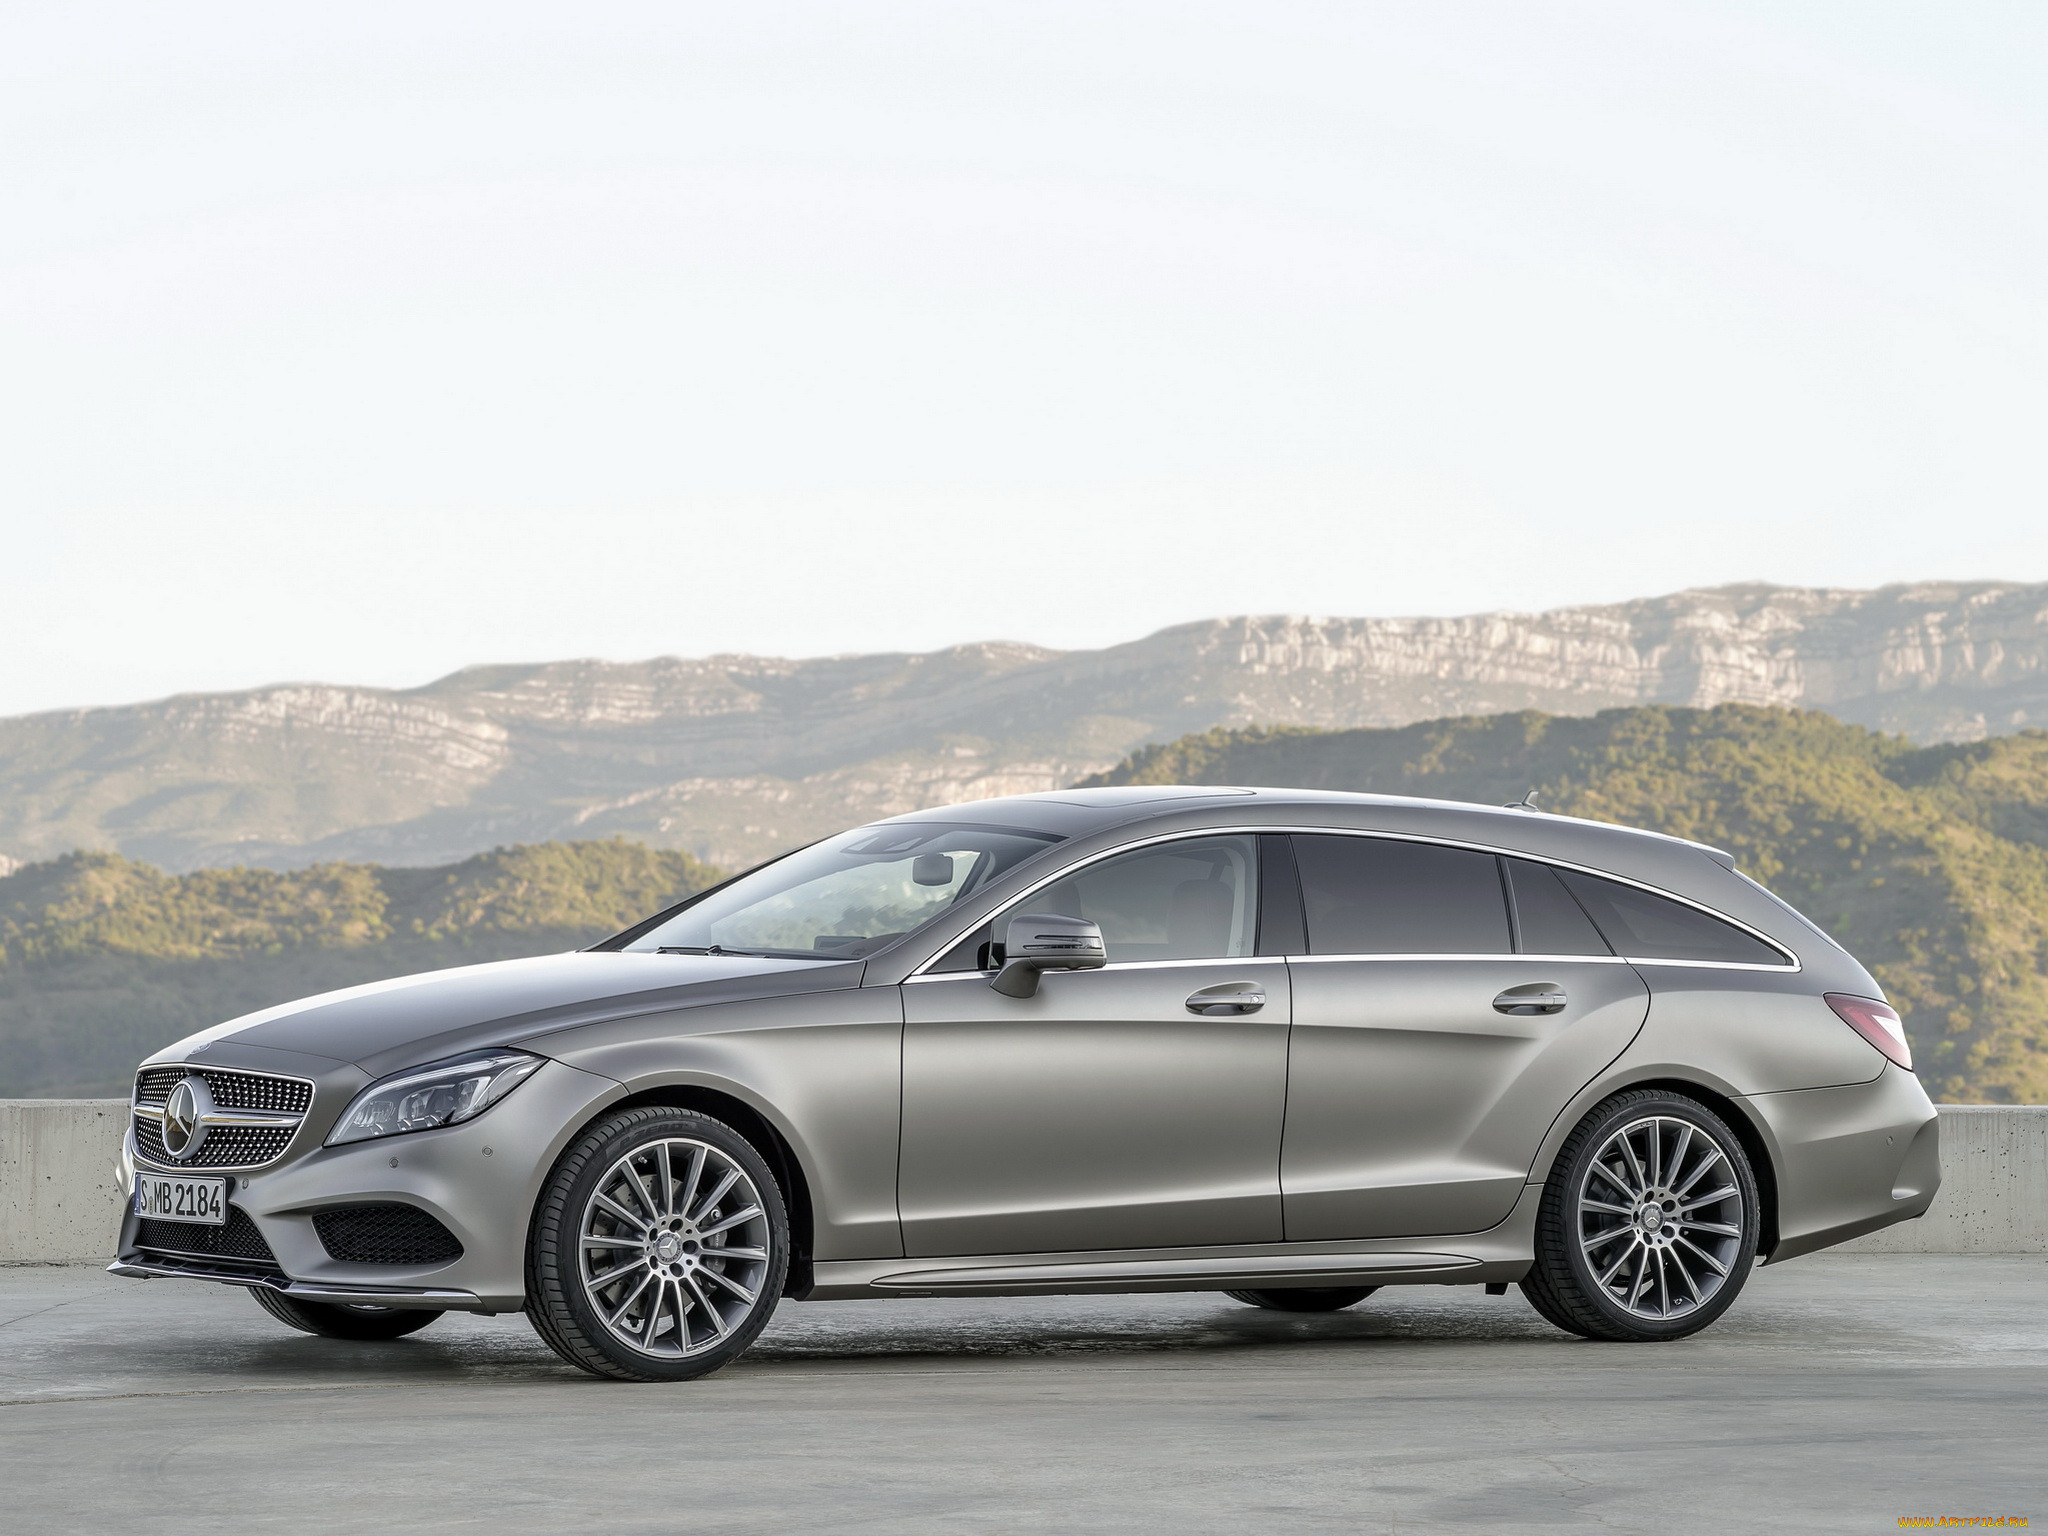 , mercedes-benz, , sports, amg, brake, shooting, cls, 400, 2014, x218, package